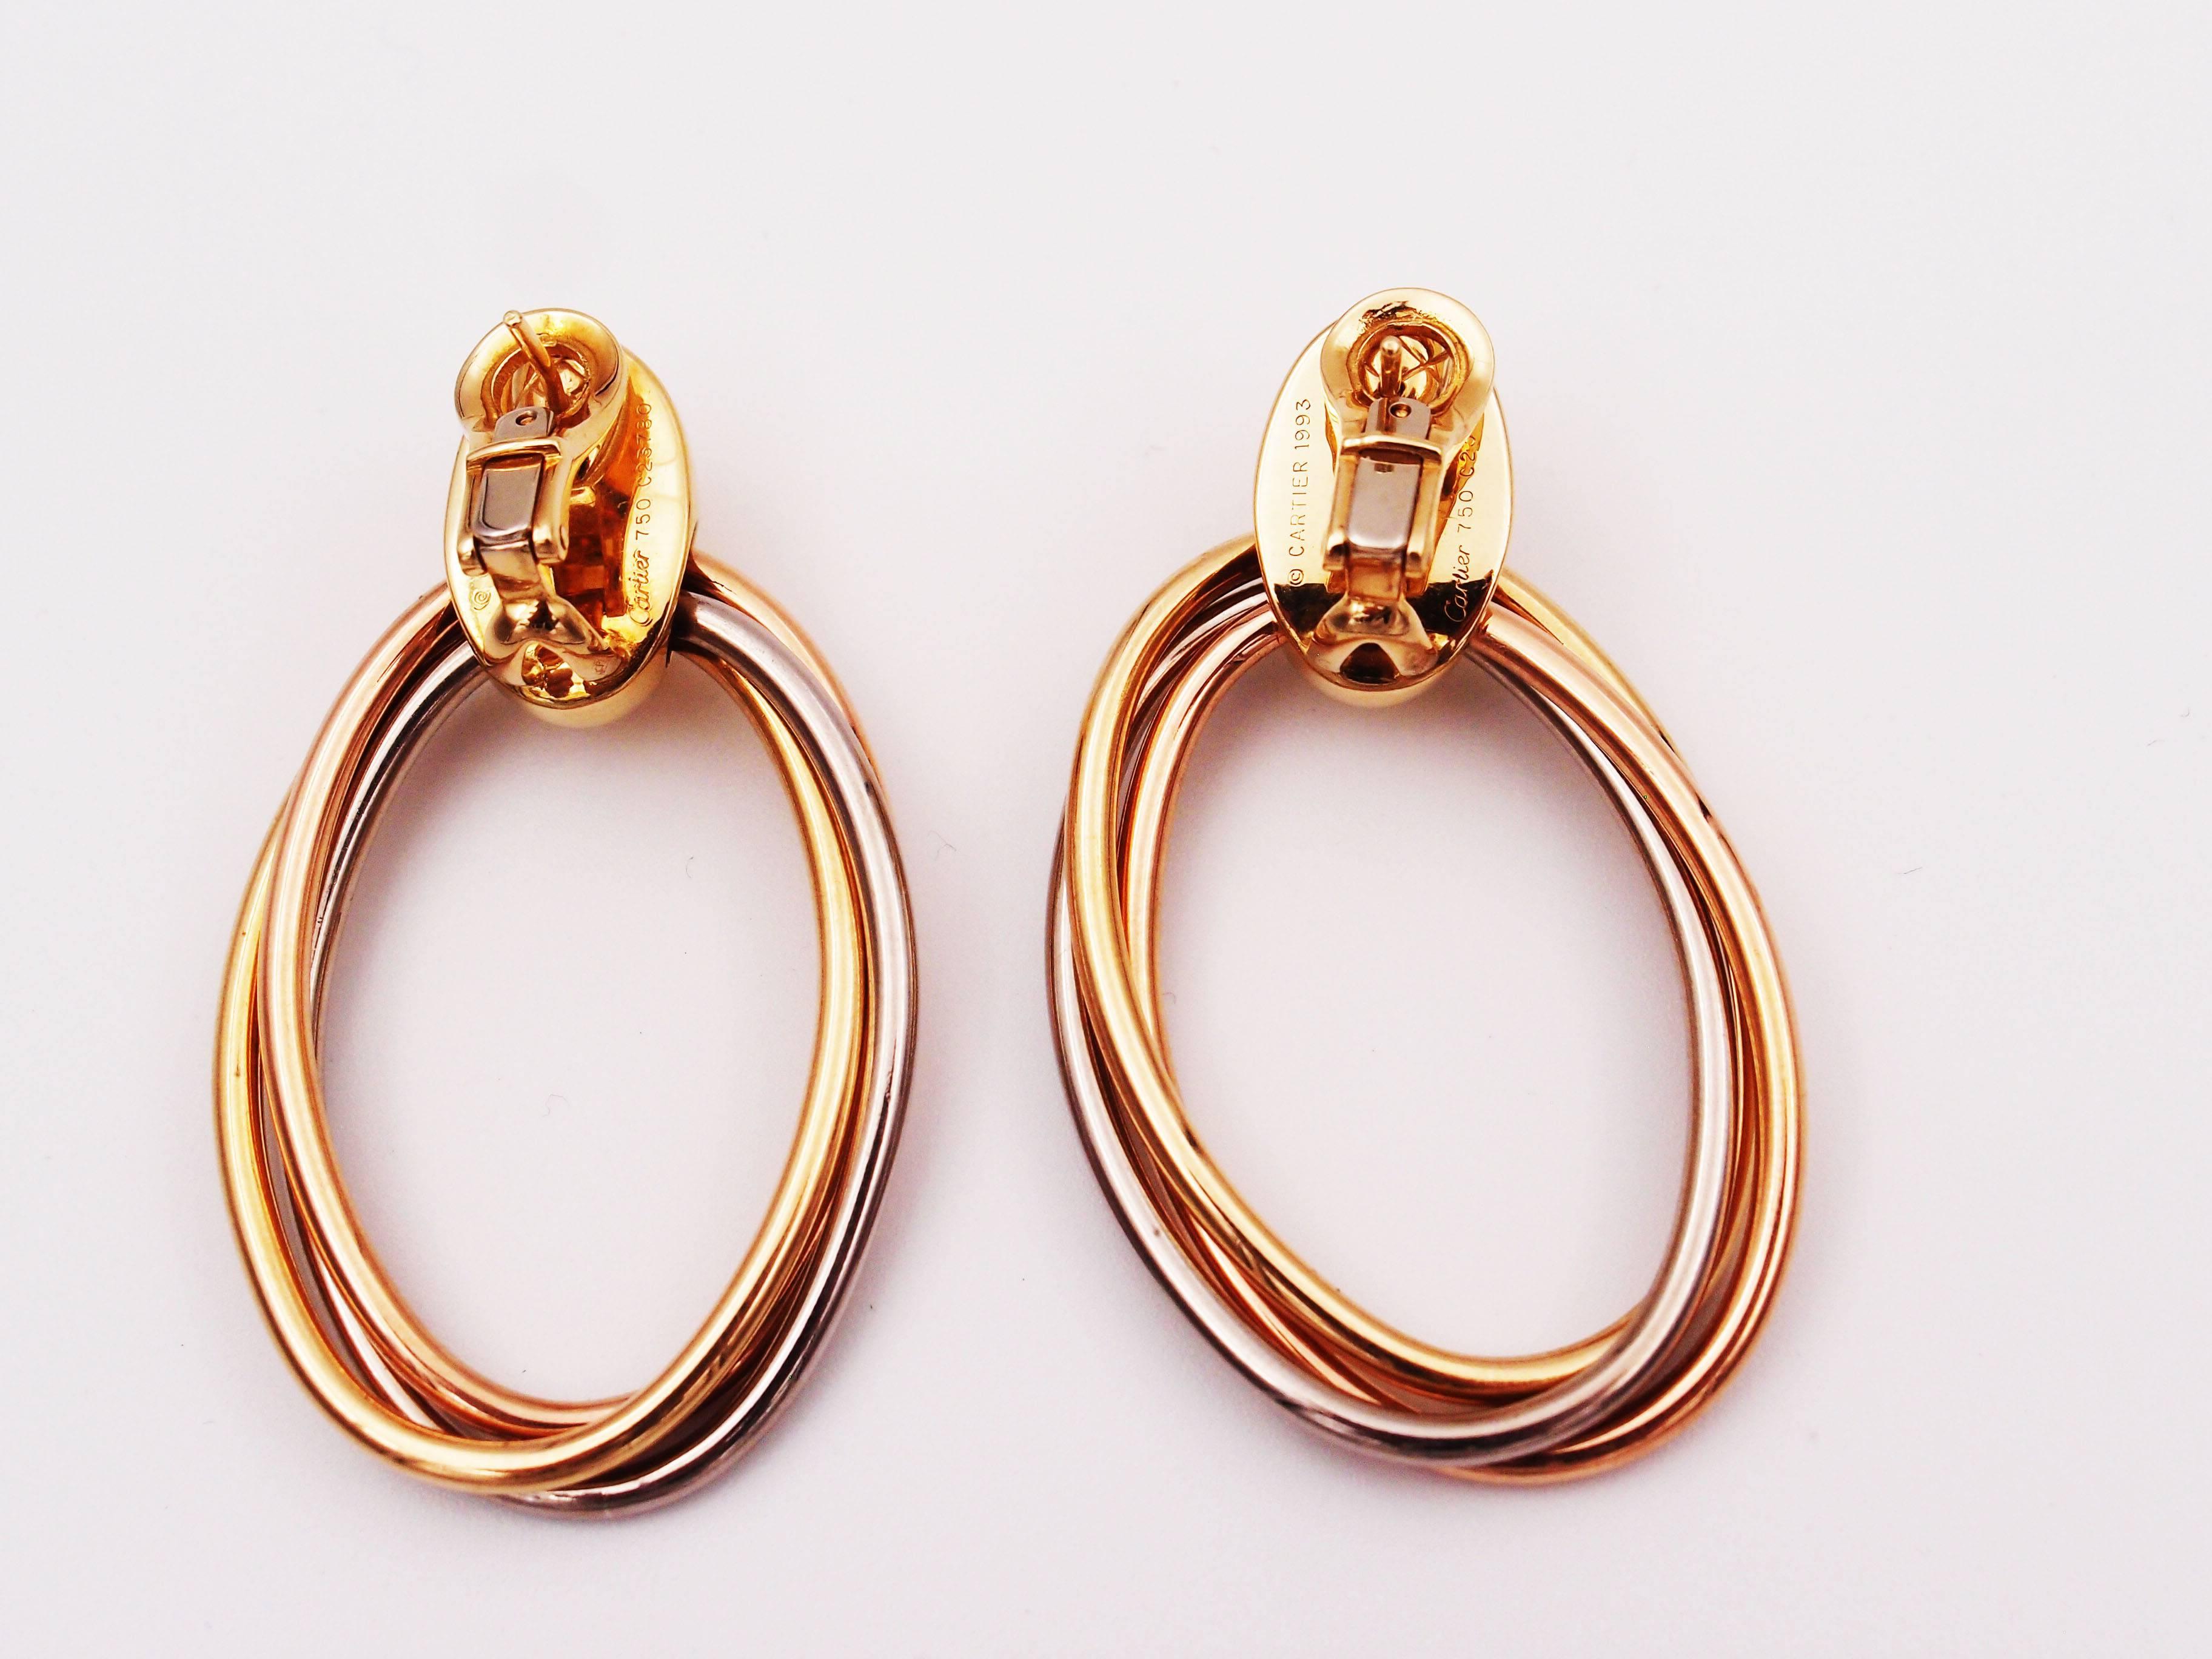 Cartier 18K yellow, white and pink gold trinity oval hoop tri-colored gold earrings
Signed Cartier 1993, serial# C23xxx

